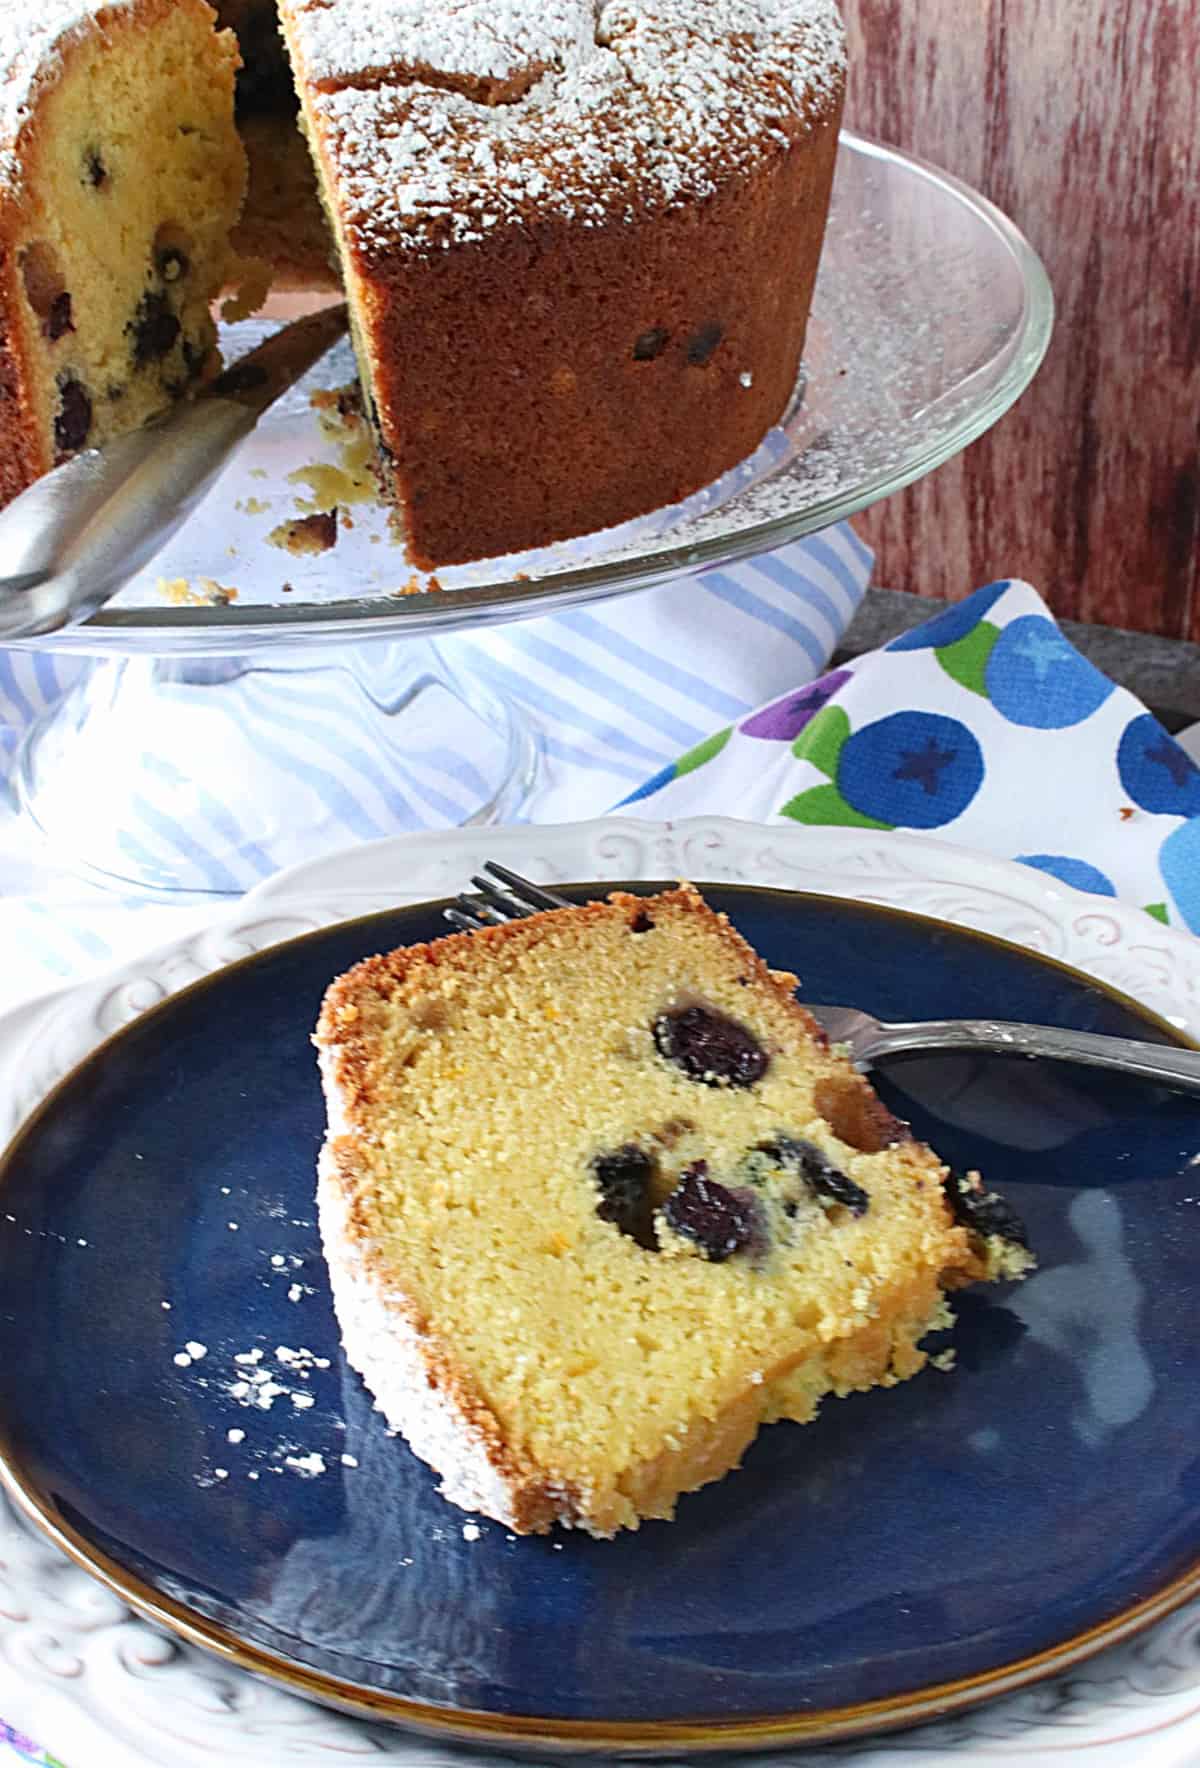 A slice of Sour Cream Poundcake with Blueberries and Orange on a blue plate with a fork.